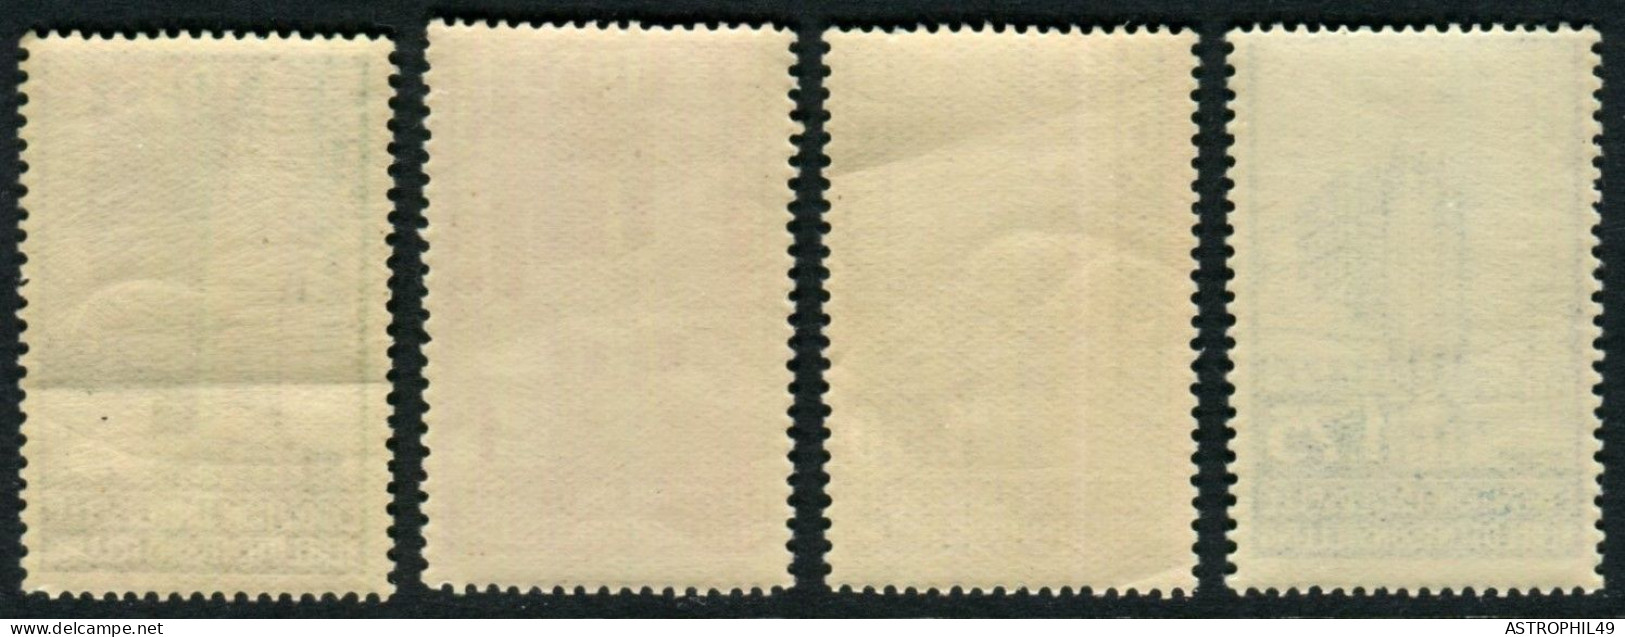 1934 BE Expo Universelle Bx 1935, Cob386-89 - 1935 – Brussels (Belgium)